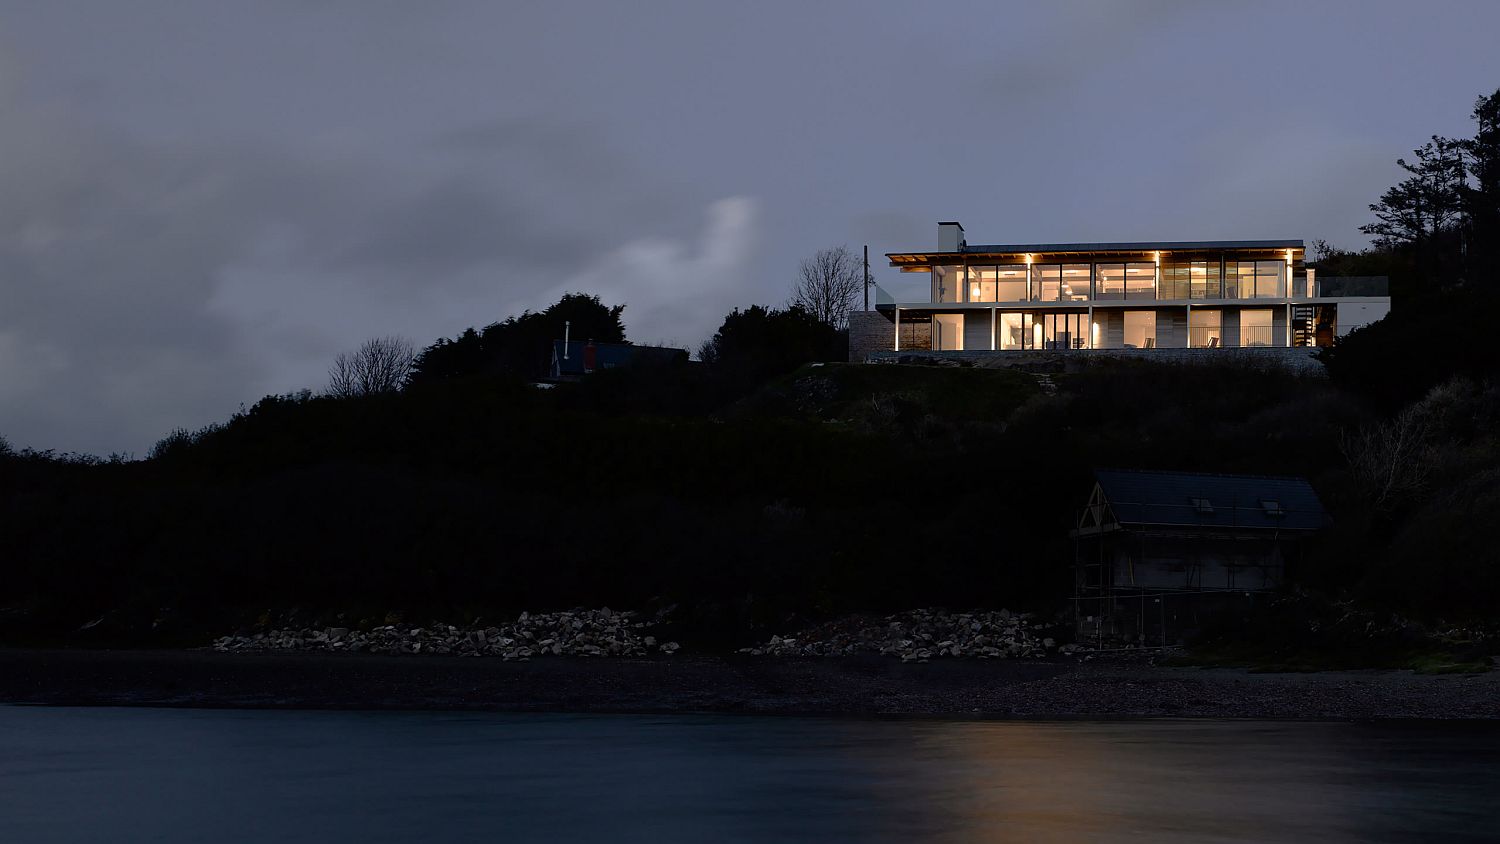 View of the Trewarren House after sunset